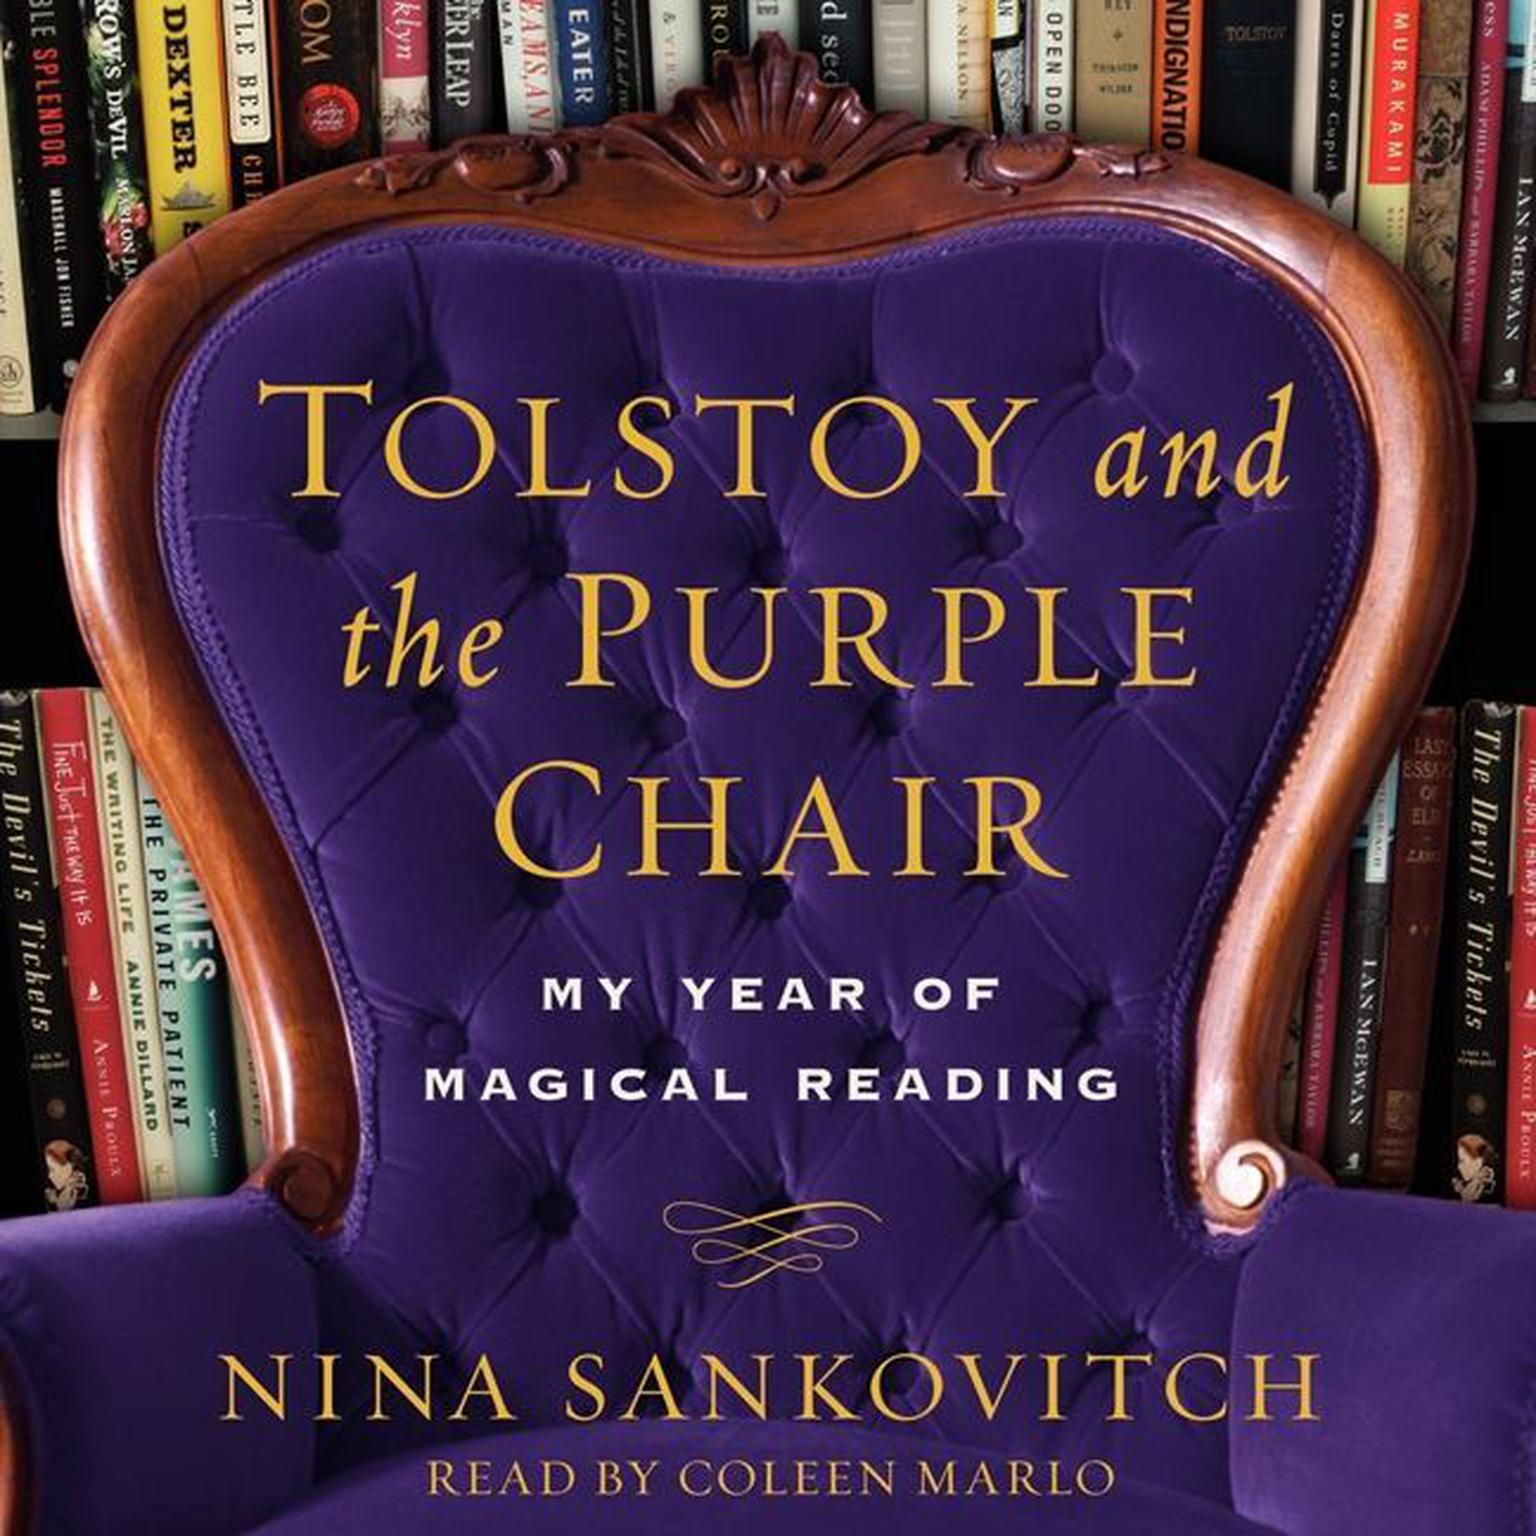 Tolstoy and the Purple Chair: My Year of Magical Reading Audiobook, by Nina Sankovitch